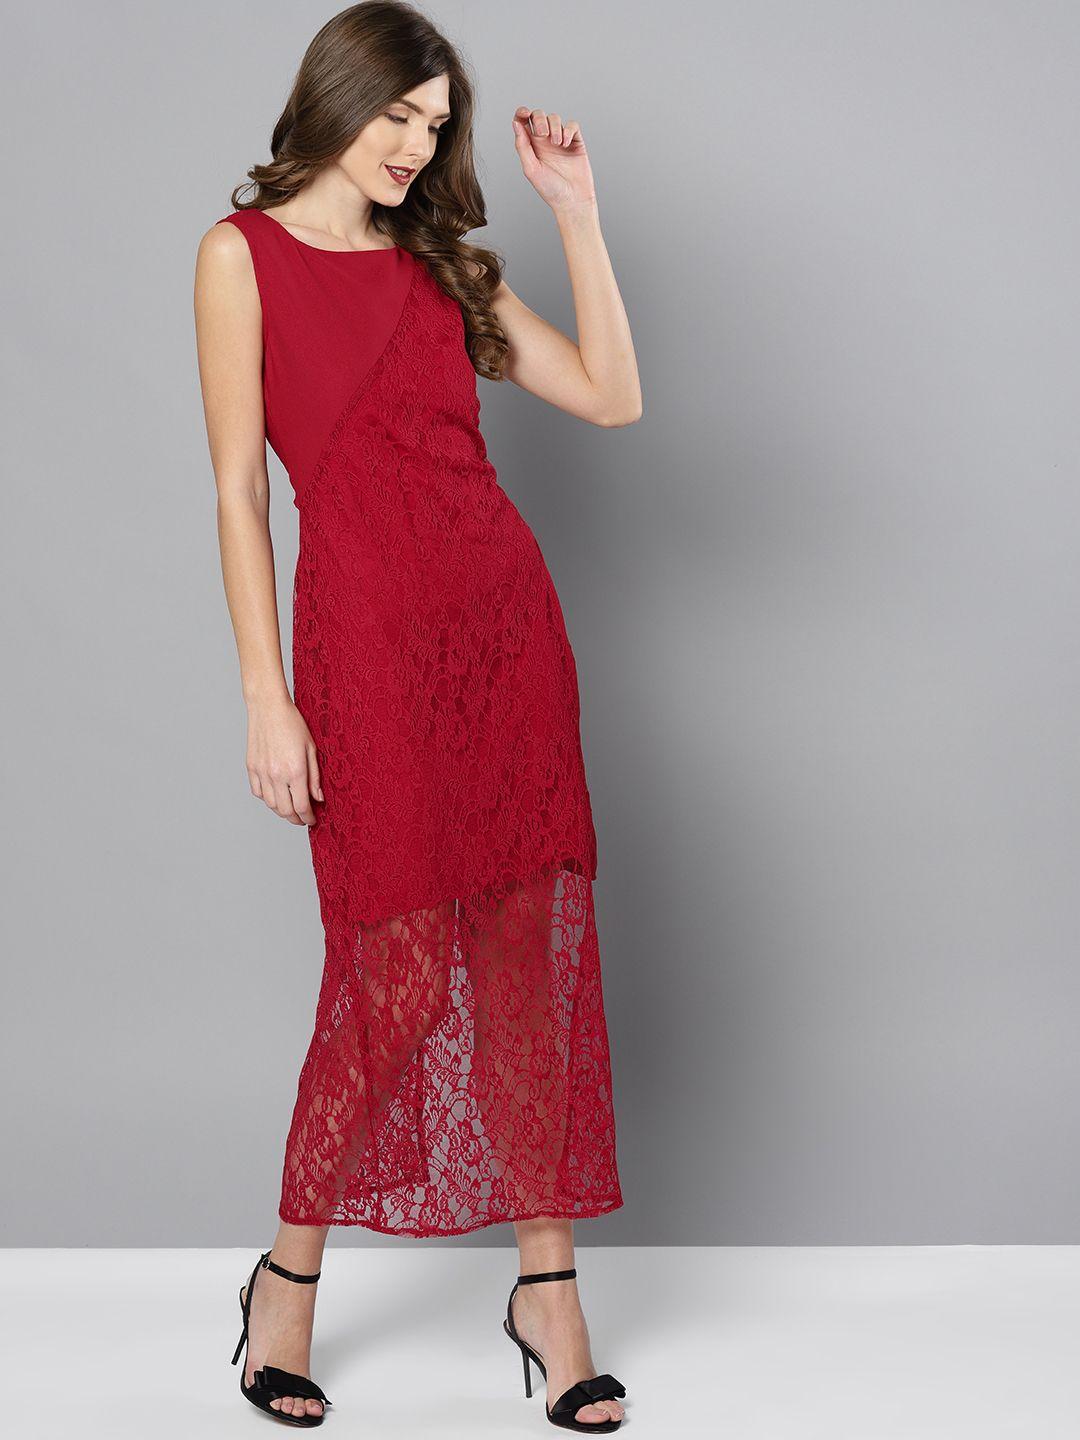 marie-claire-women-red-lace-maxi-dress